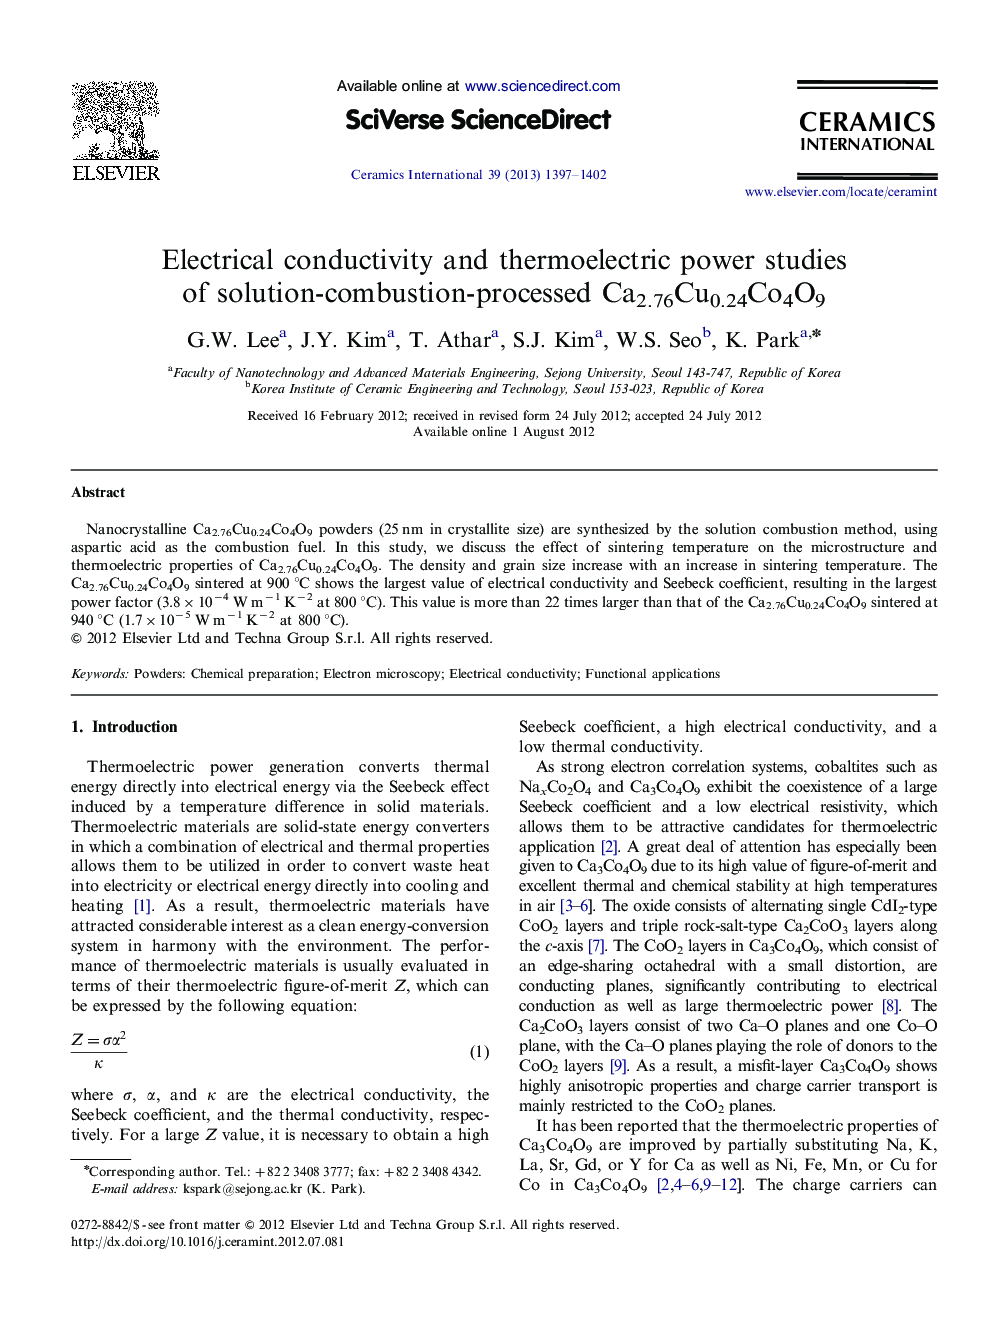 Electrical conductivity and thermoelectric power studies of solution-combustion-processed Ca2.76Cu0.24Co4O9